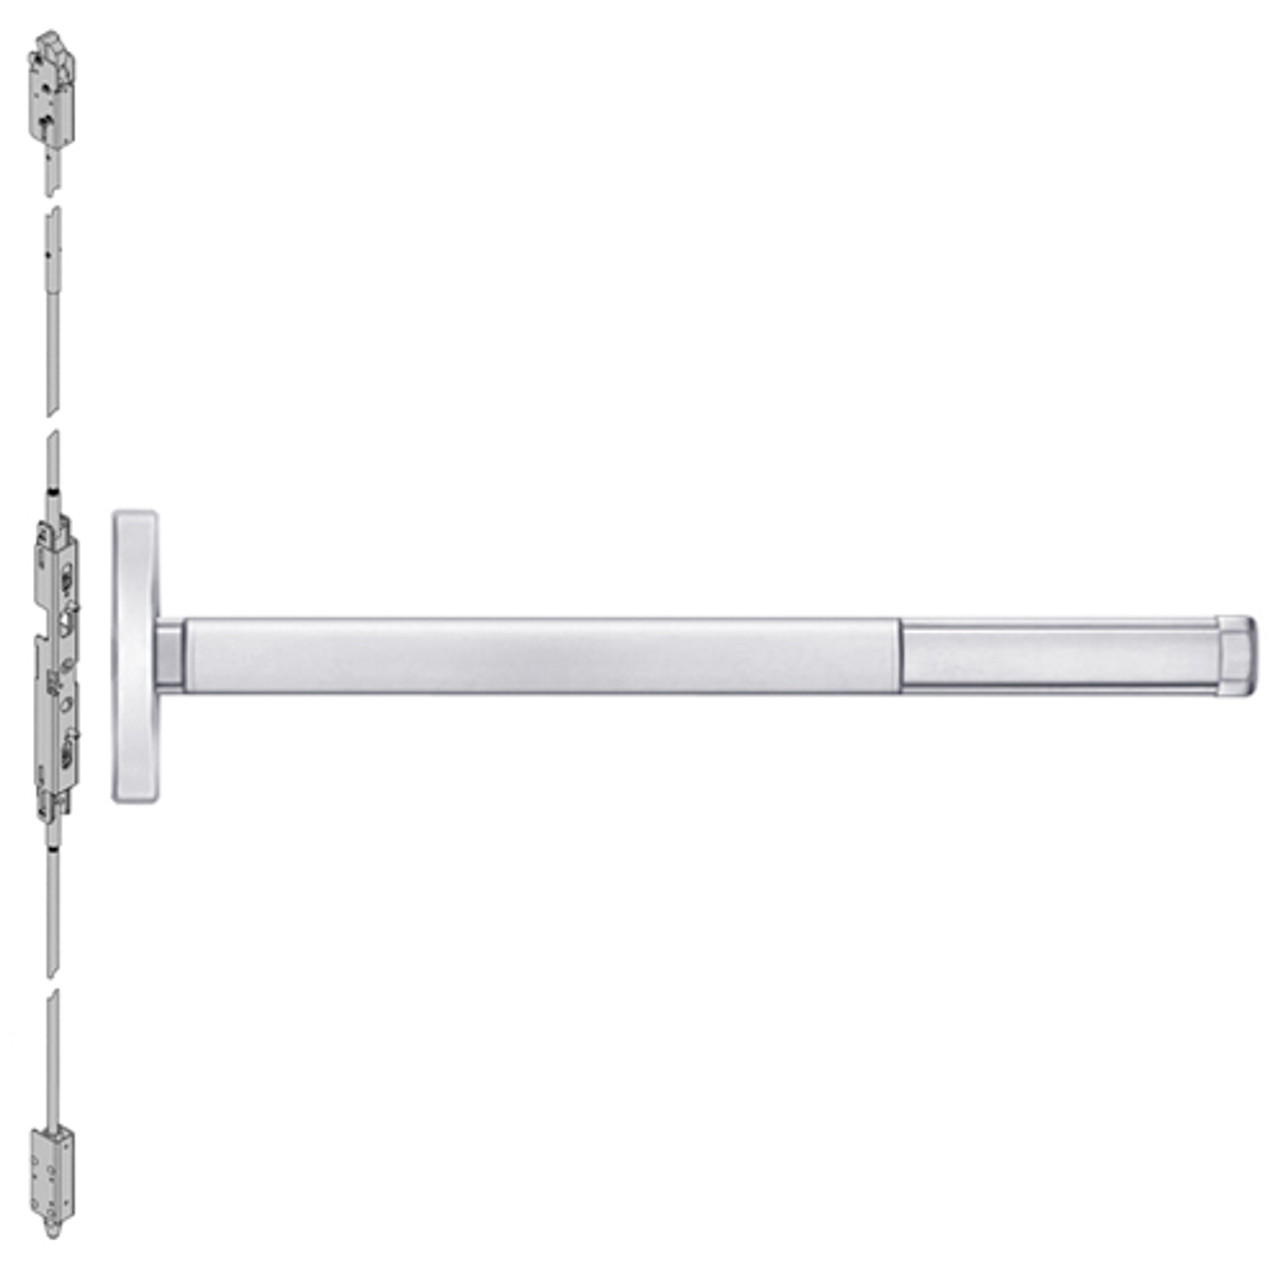 DE2614-625-36 PHI 2600 Series Concealed Vertical Rod Exit Device with Delayed Egress Prepped for Lever Always Active in Bright Chrome Finish